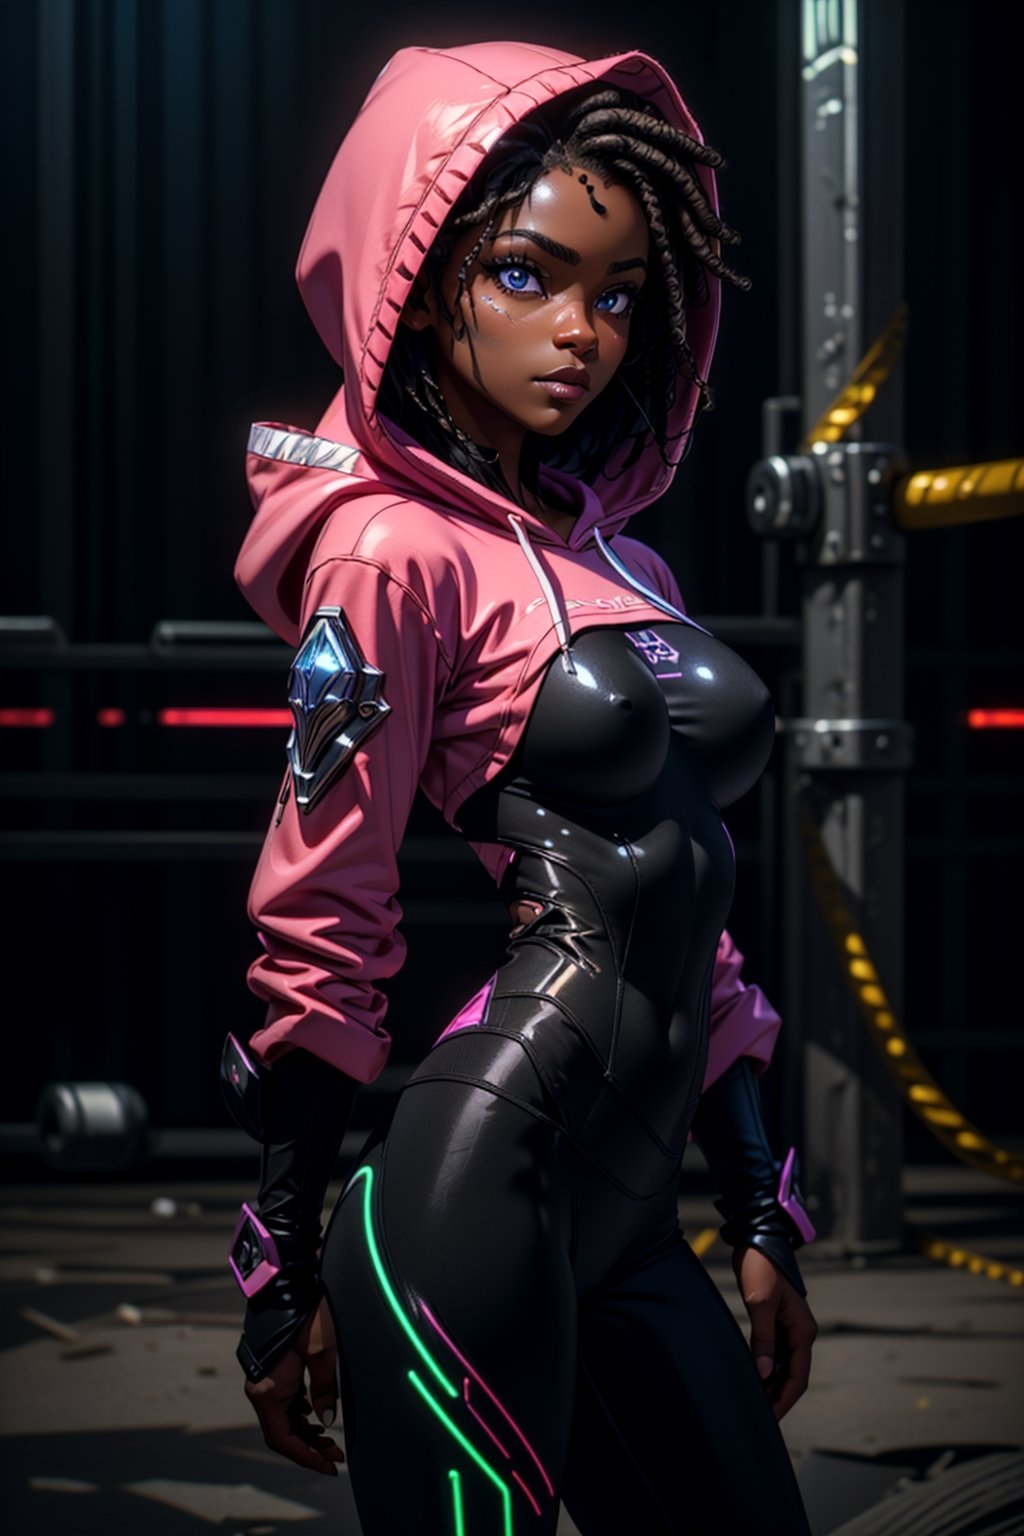 (1girl), ((vigilanty, hoodie, leggings, neon lights, Arora clothes, bodysuit:1.3)), (side view, muscular, fit, cyberware, Armor), ((large Breasts, rounded breasts:1.3)), (accentuated hip), (large pelvic, big ass), ((narrow waist, curvy waist:1.2)), ((slim, skinny waist, slender body:1.2)), (fighting pose:1.2), dreadlocks hairstyle, colour streaked hair, highlights, seductress, tempting,masterpiece, best quality, ultra highres, depth of field, (cinematic lighting:1.2), (detailed face, detailed eyes:1.2), (detailed lips, rose lips:1.2), (detailed background:1.2), (battle field, post war:1.2) (masterpiece:1.2), (ultra detailed), (best quality), intricate, comprehensive cinematic, scientific photography, (gradients), colorful, detailed landscape, shiny skin, looking_at_viewer ,perfecteyes,mecha musume,(ebony skin:1.5)